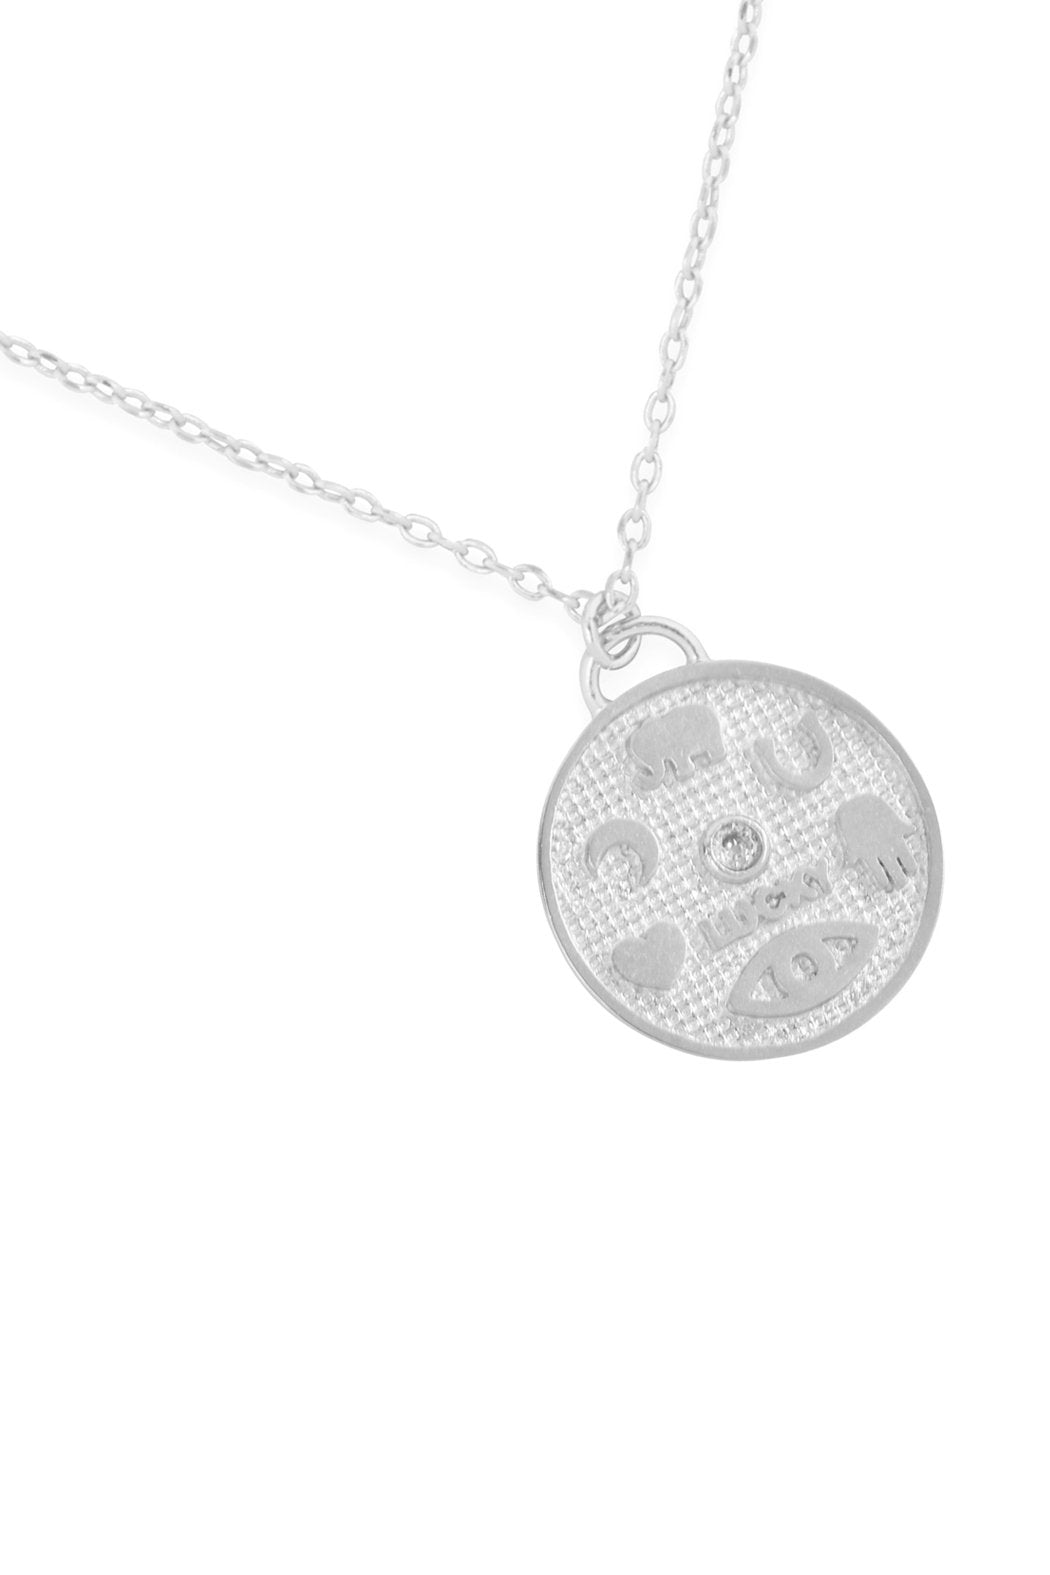 Hdnfn353 - Cast Round Pendant Necklace - LOLA LUXE